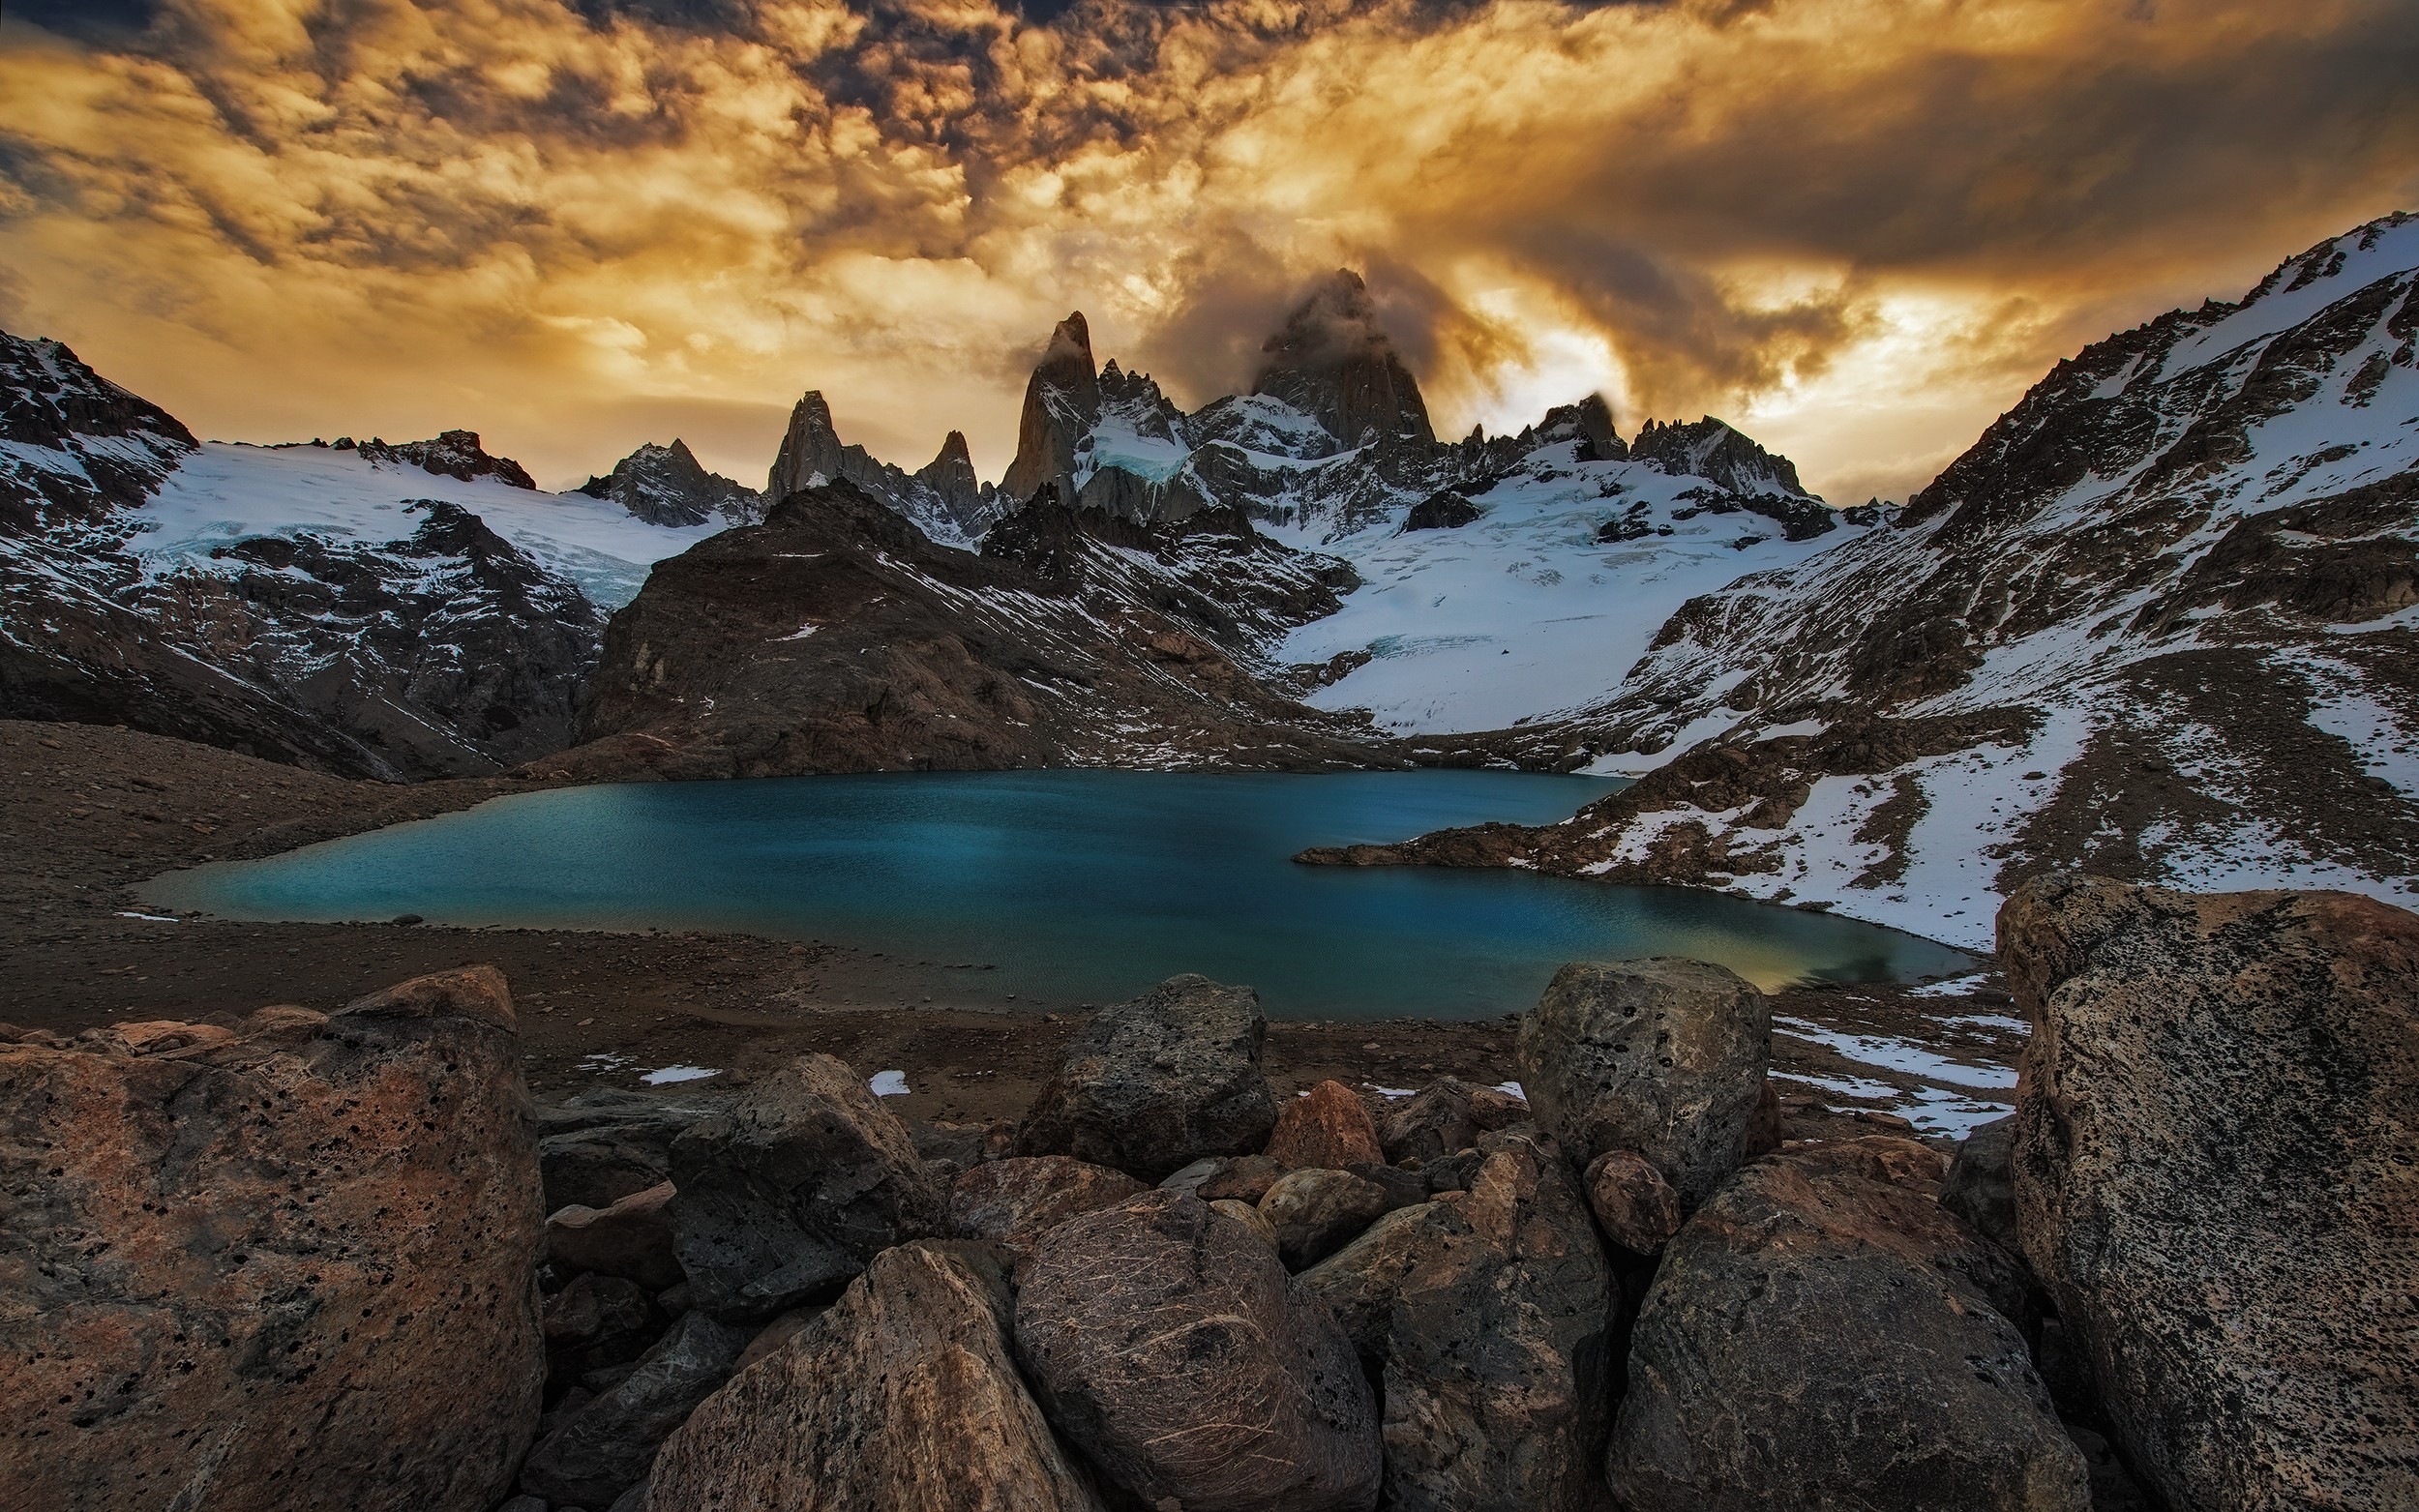 General 2500x1563 mountains lake sunset nature clouds landscape Argentina snowy peak South America